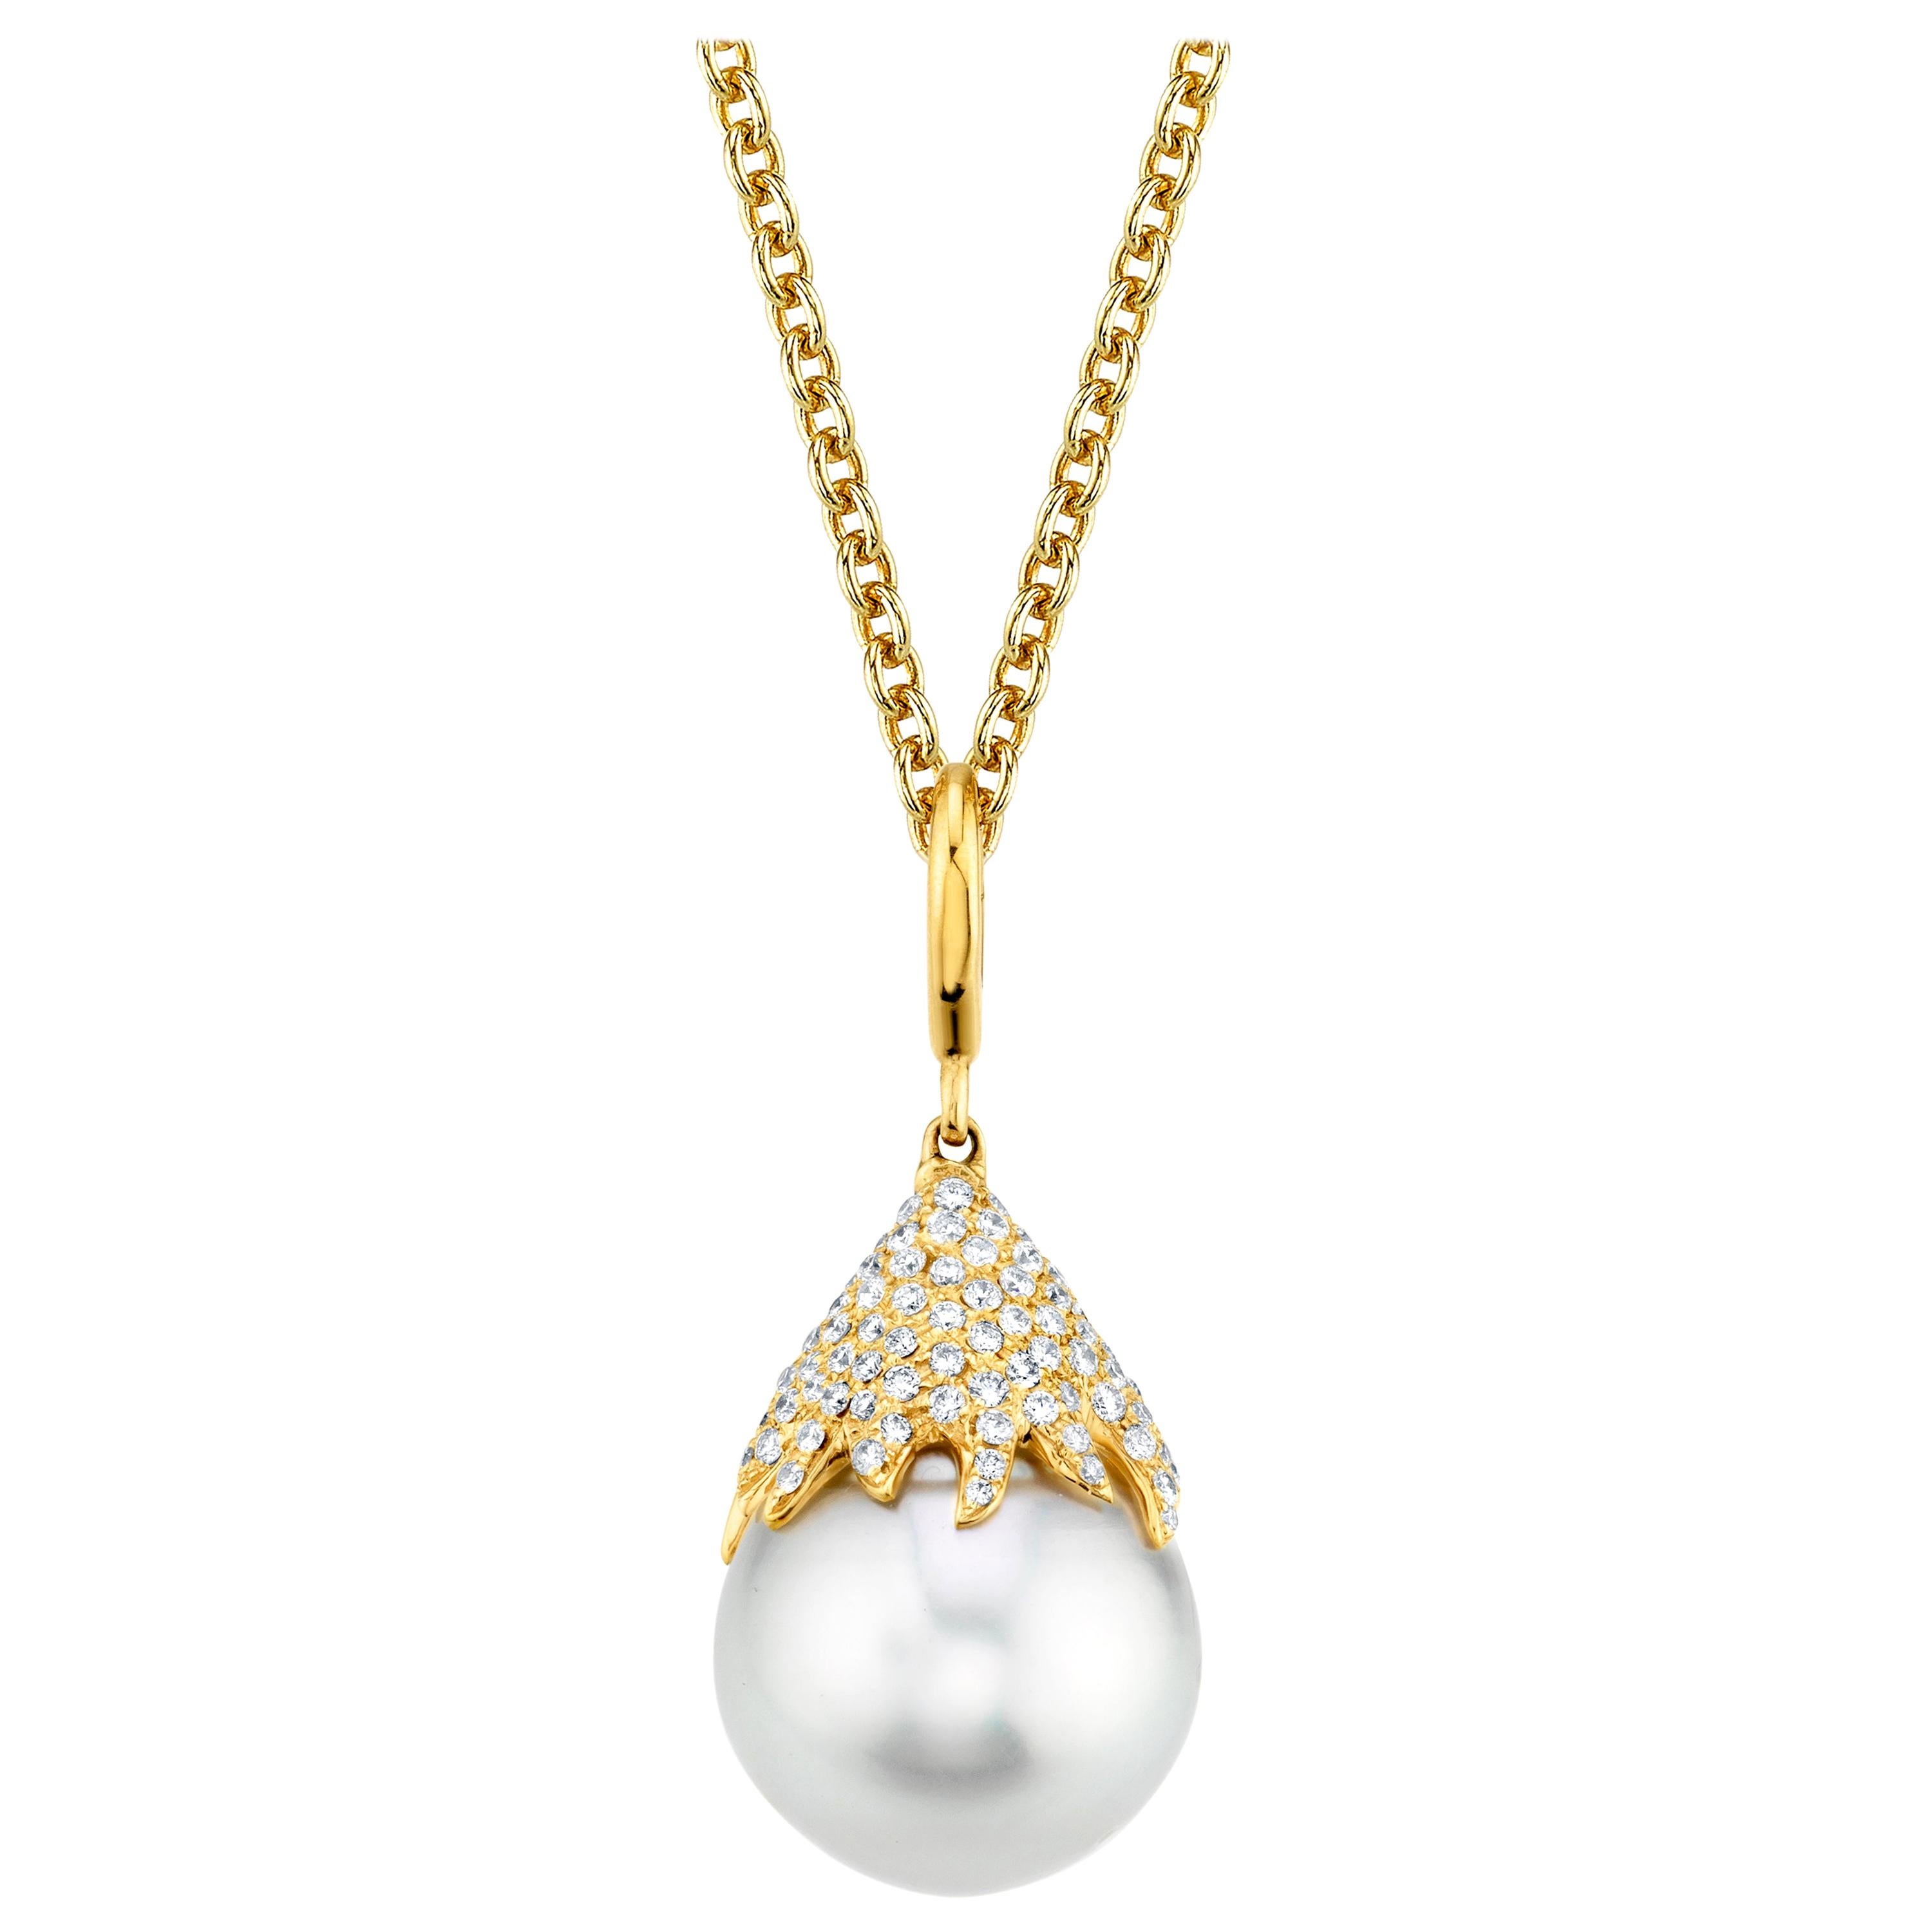 15mm White South Sea Pearl and Diamond Necklace in 18k Yellow Gold  